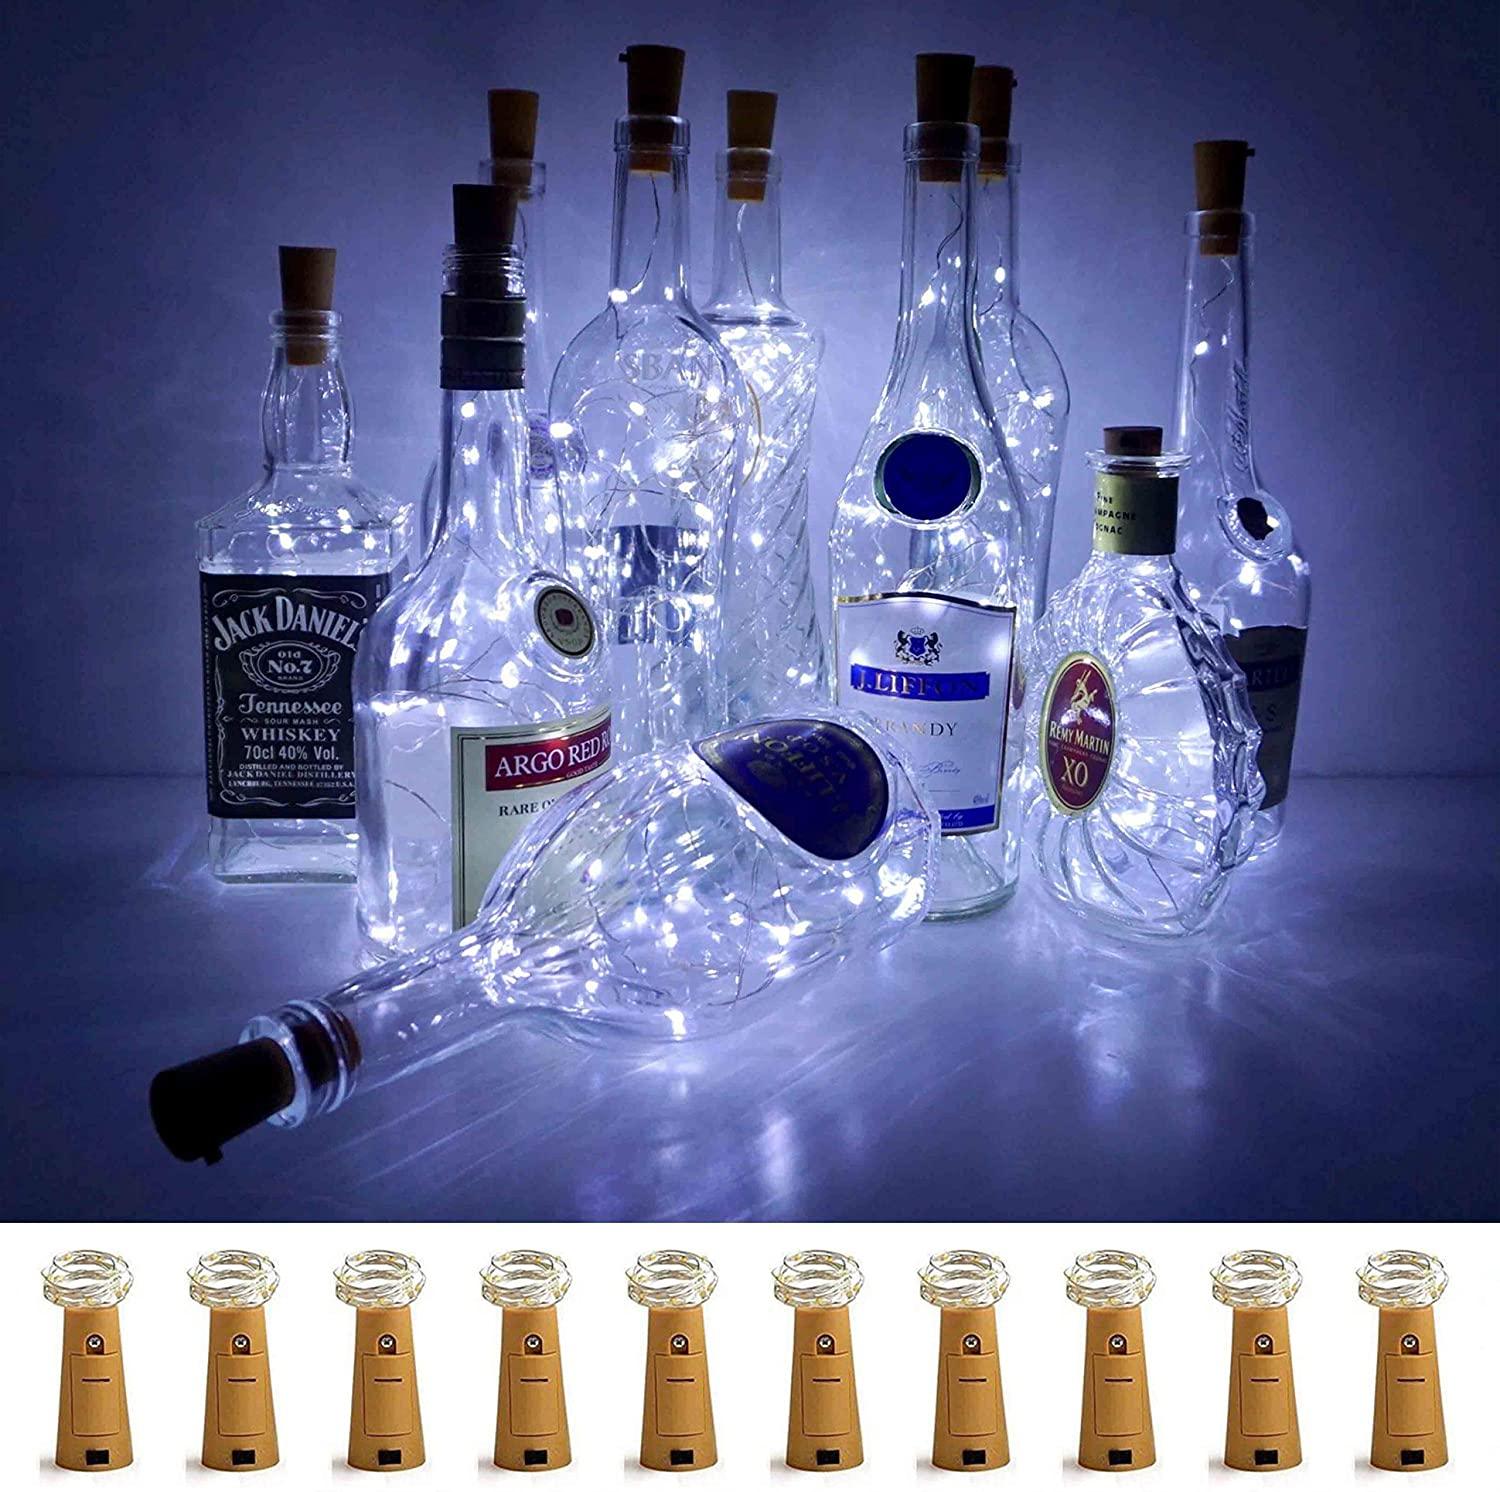 Cork Lights for Wine Bottles Battery Operated Copper Wire Micro Starry String Lights for Jars DIY Crafts - If you say i do